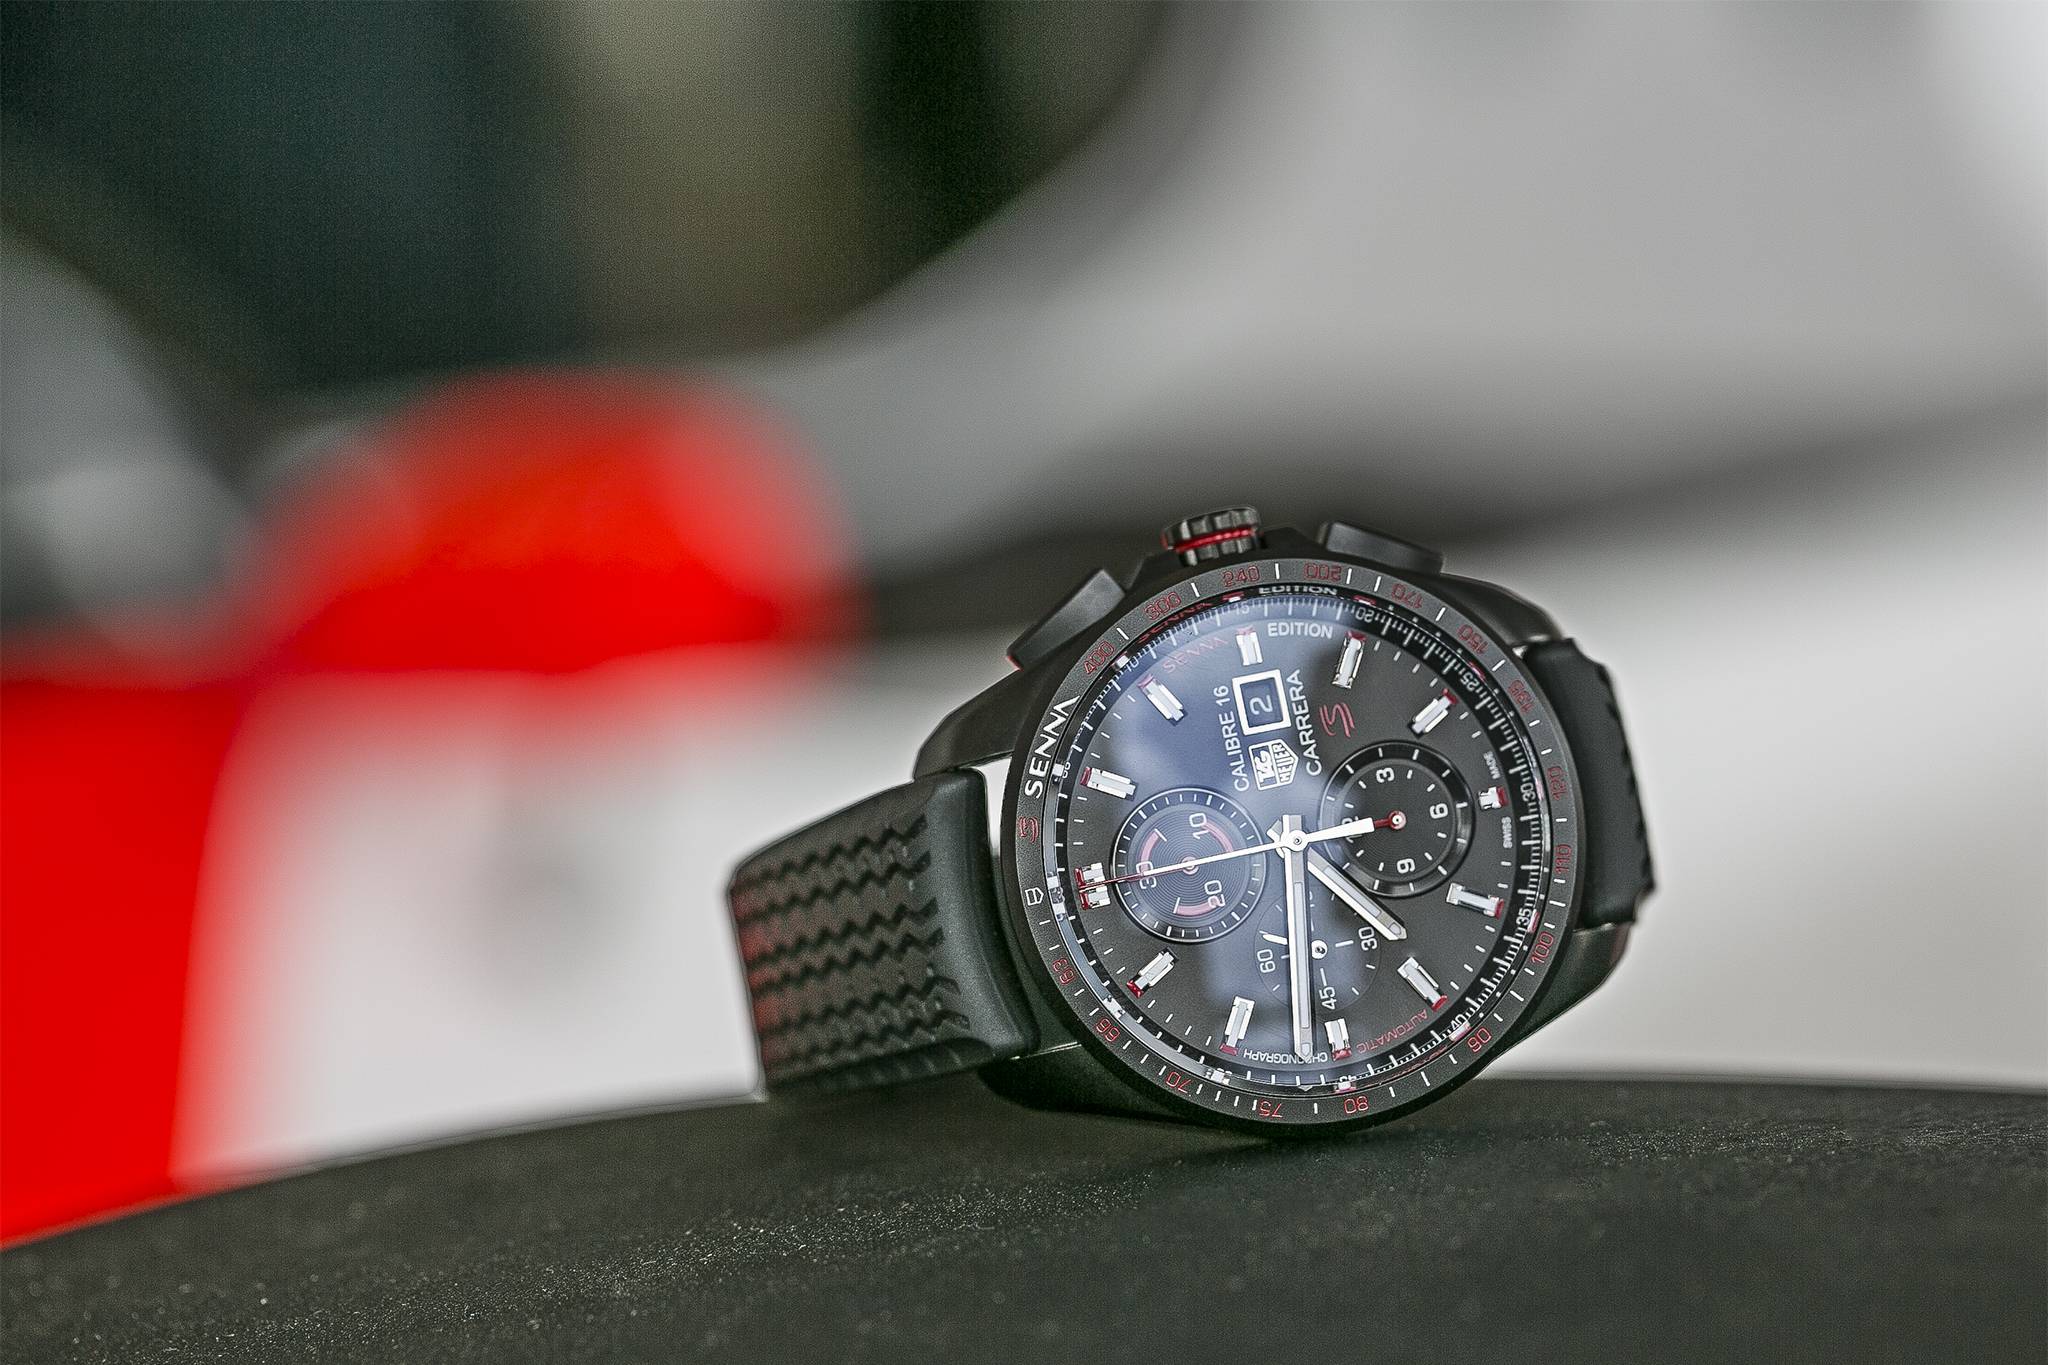 Tag Heuer Carrera Senna Special Edition Calibre 16 Automatic Chronograph 44 MM Feature Story